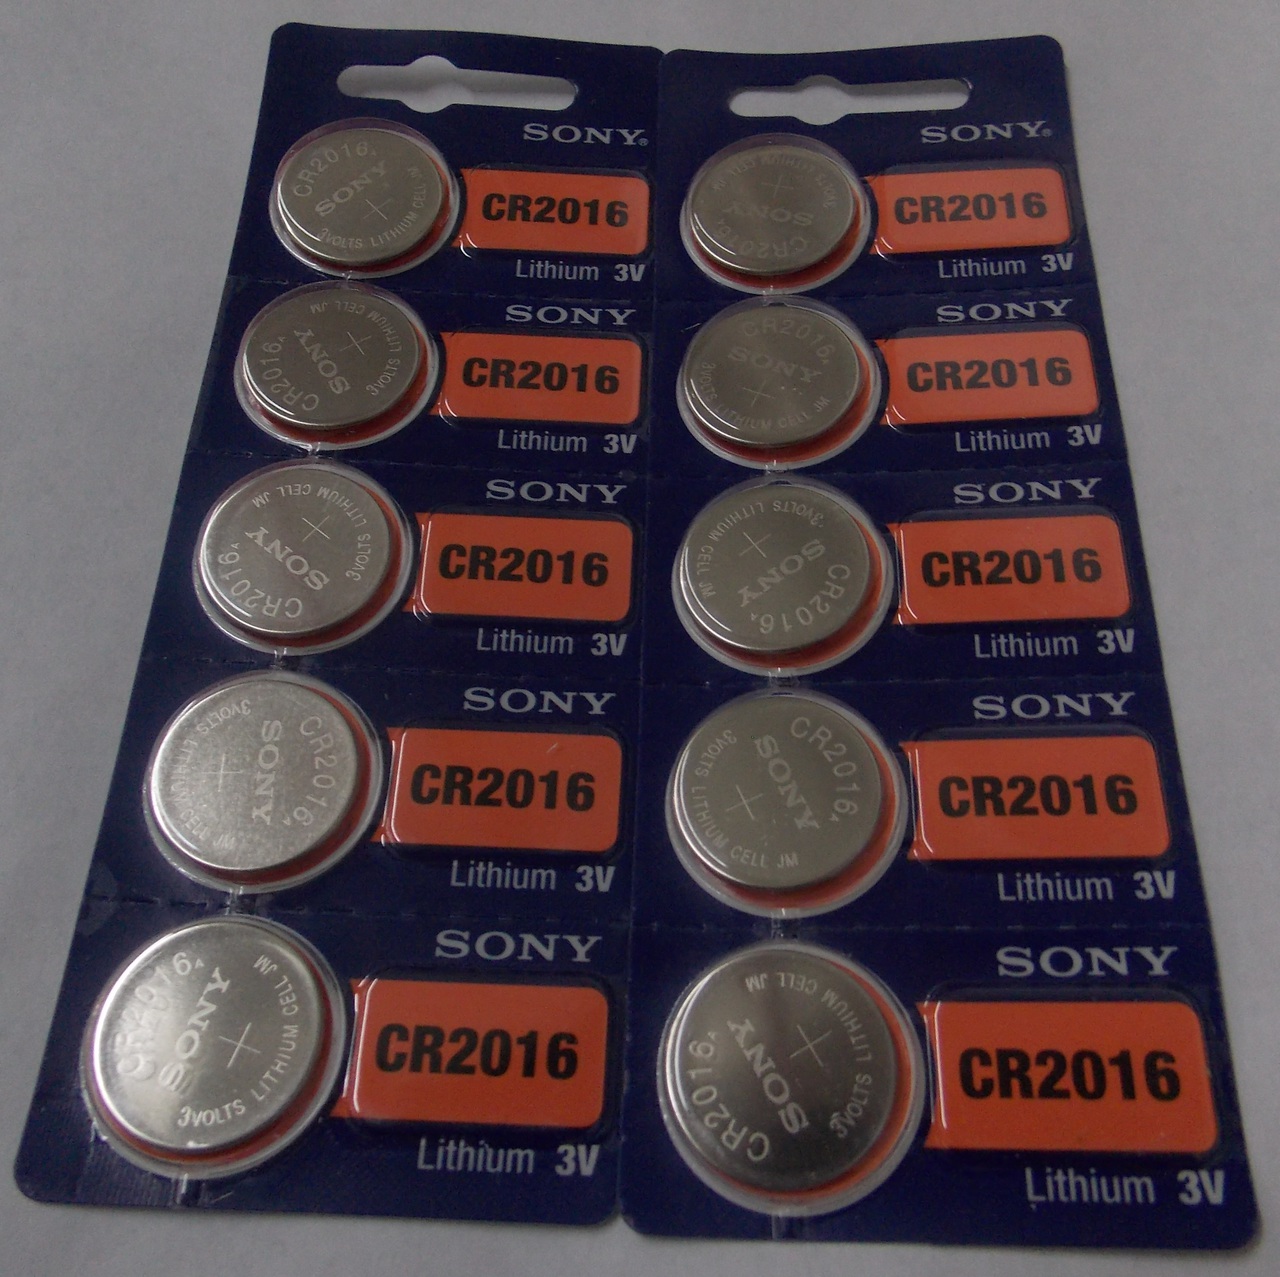 Sony CR2016 3V Lithium Coin Battery - 10 Pack + FREE SHIPPING